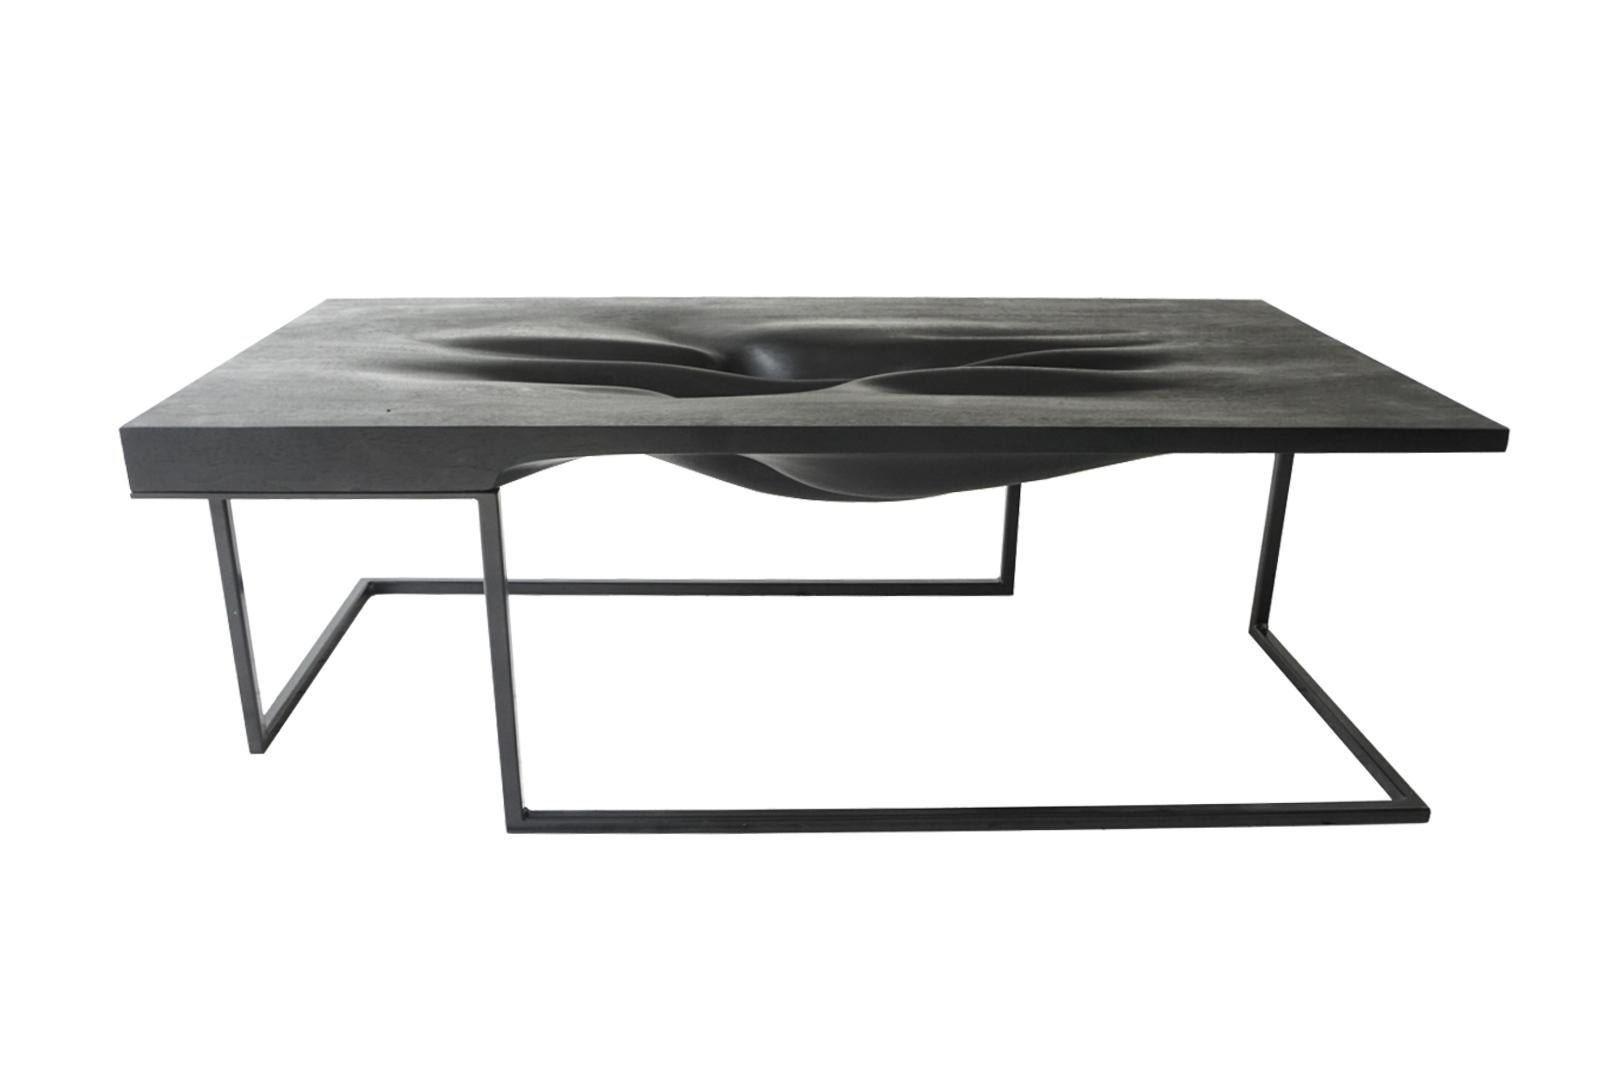 Carved ebonized coffee table by Vincent Pocsik.

Ebonized carved walnut with black metal base.

Vincent Pocsik finds the balance between old and new fabrication techniques working in conjunction to find an anatomical form that creates its own